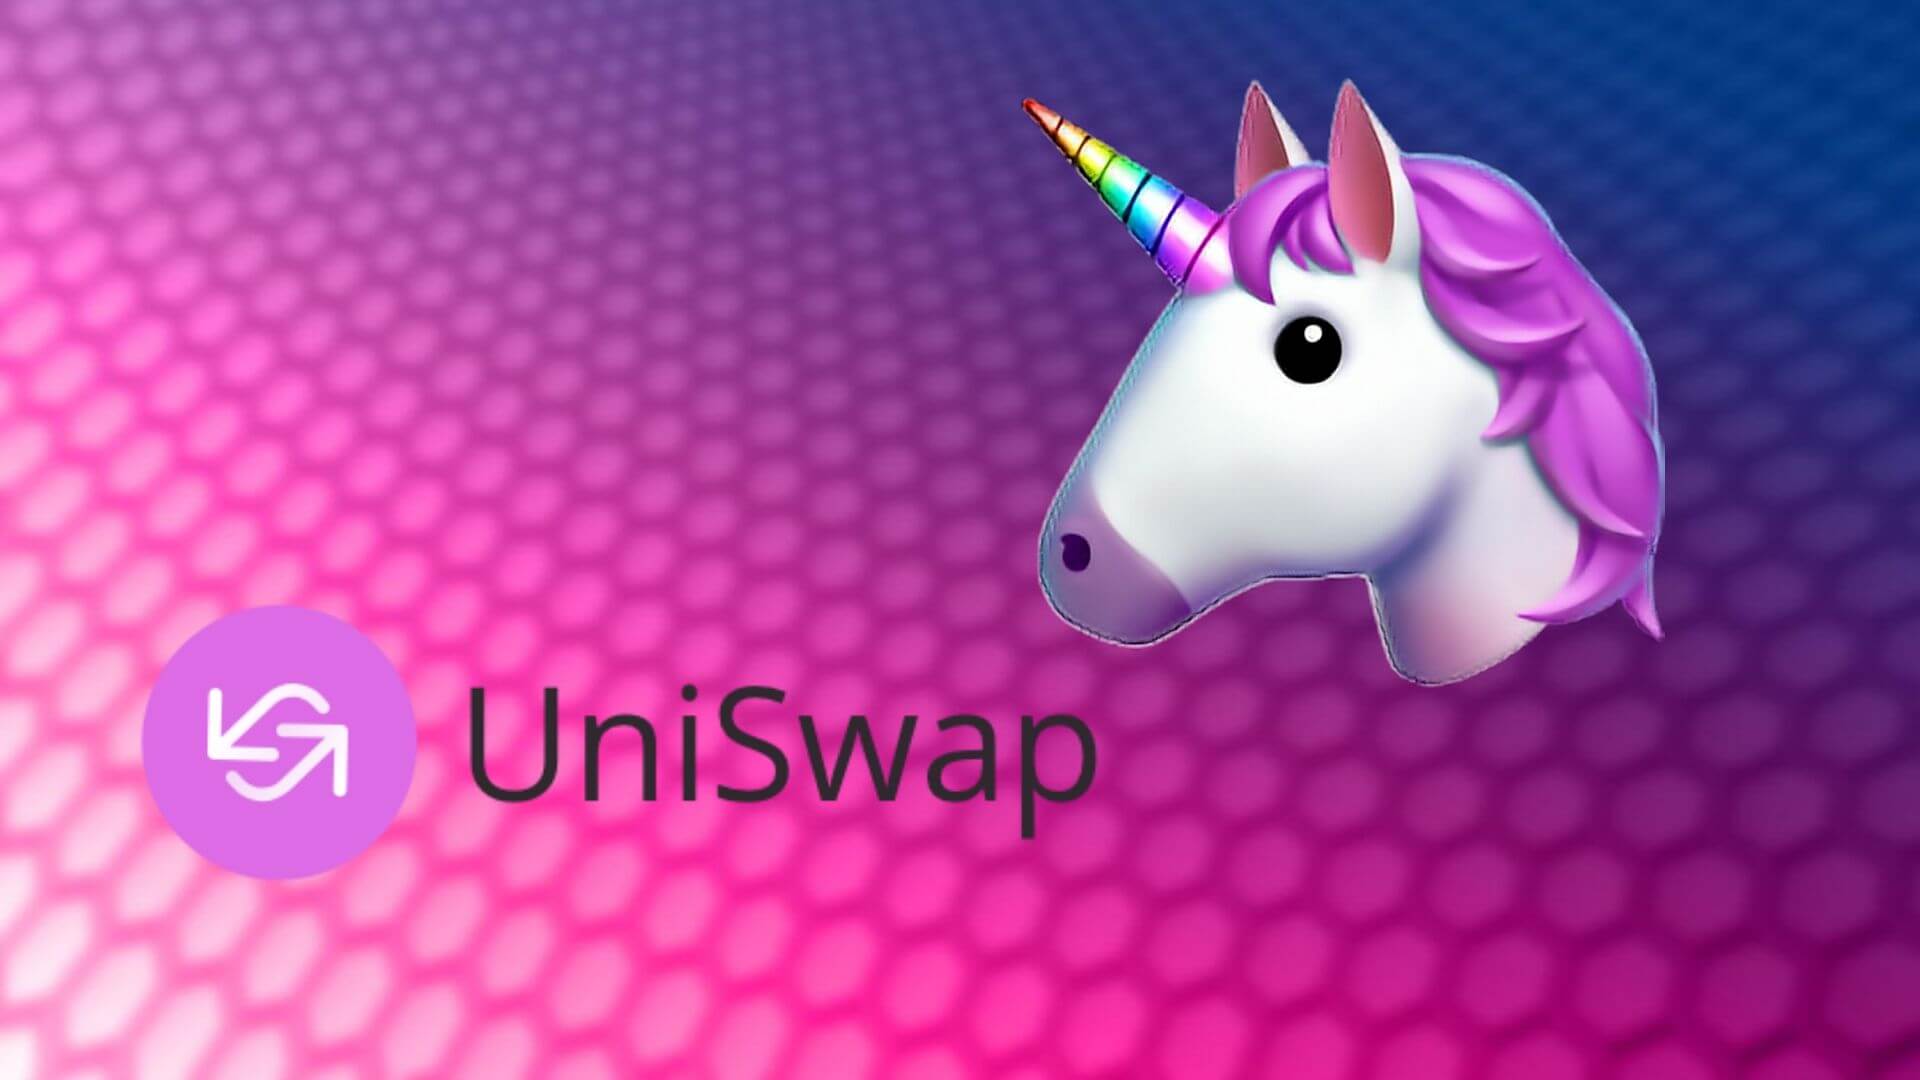 Uniswap v3 Protocol is Now Open Source After BSL Expiration